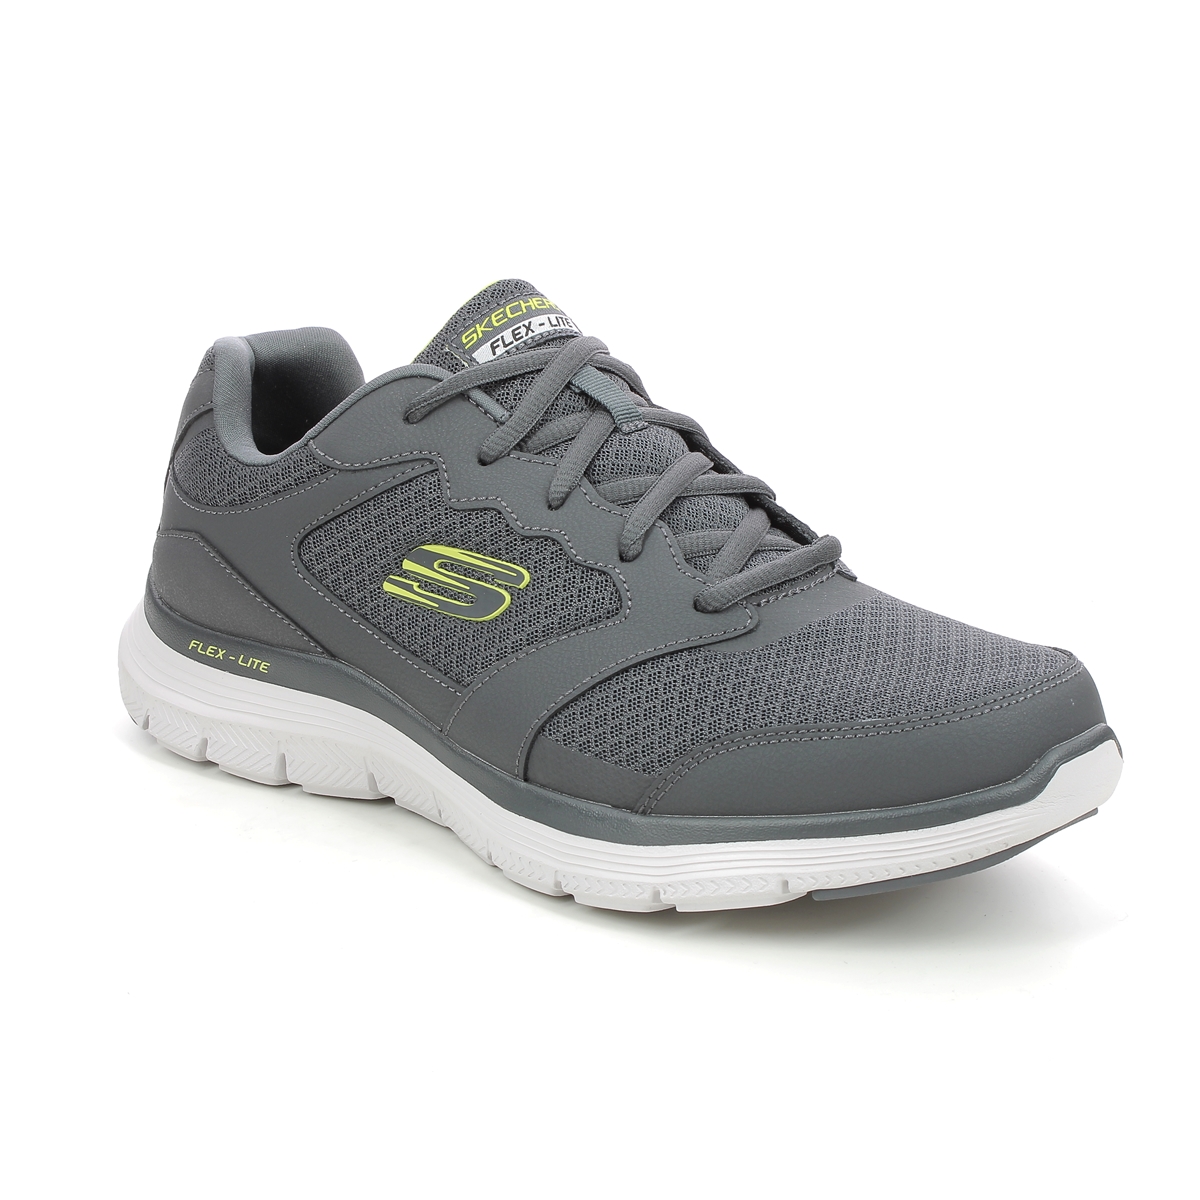 Skechers Flex Advantage 4.0 Charcoal Mens Trainers 232225 In Size 6.5 In Plain Charcoal